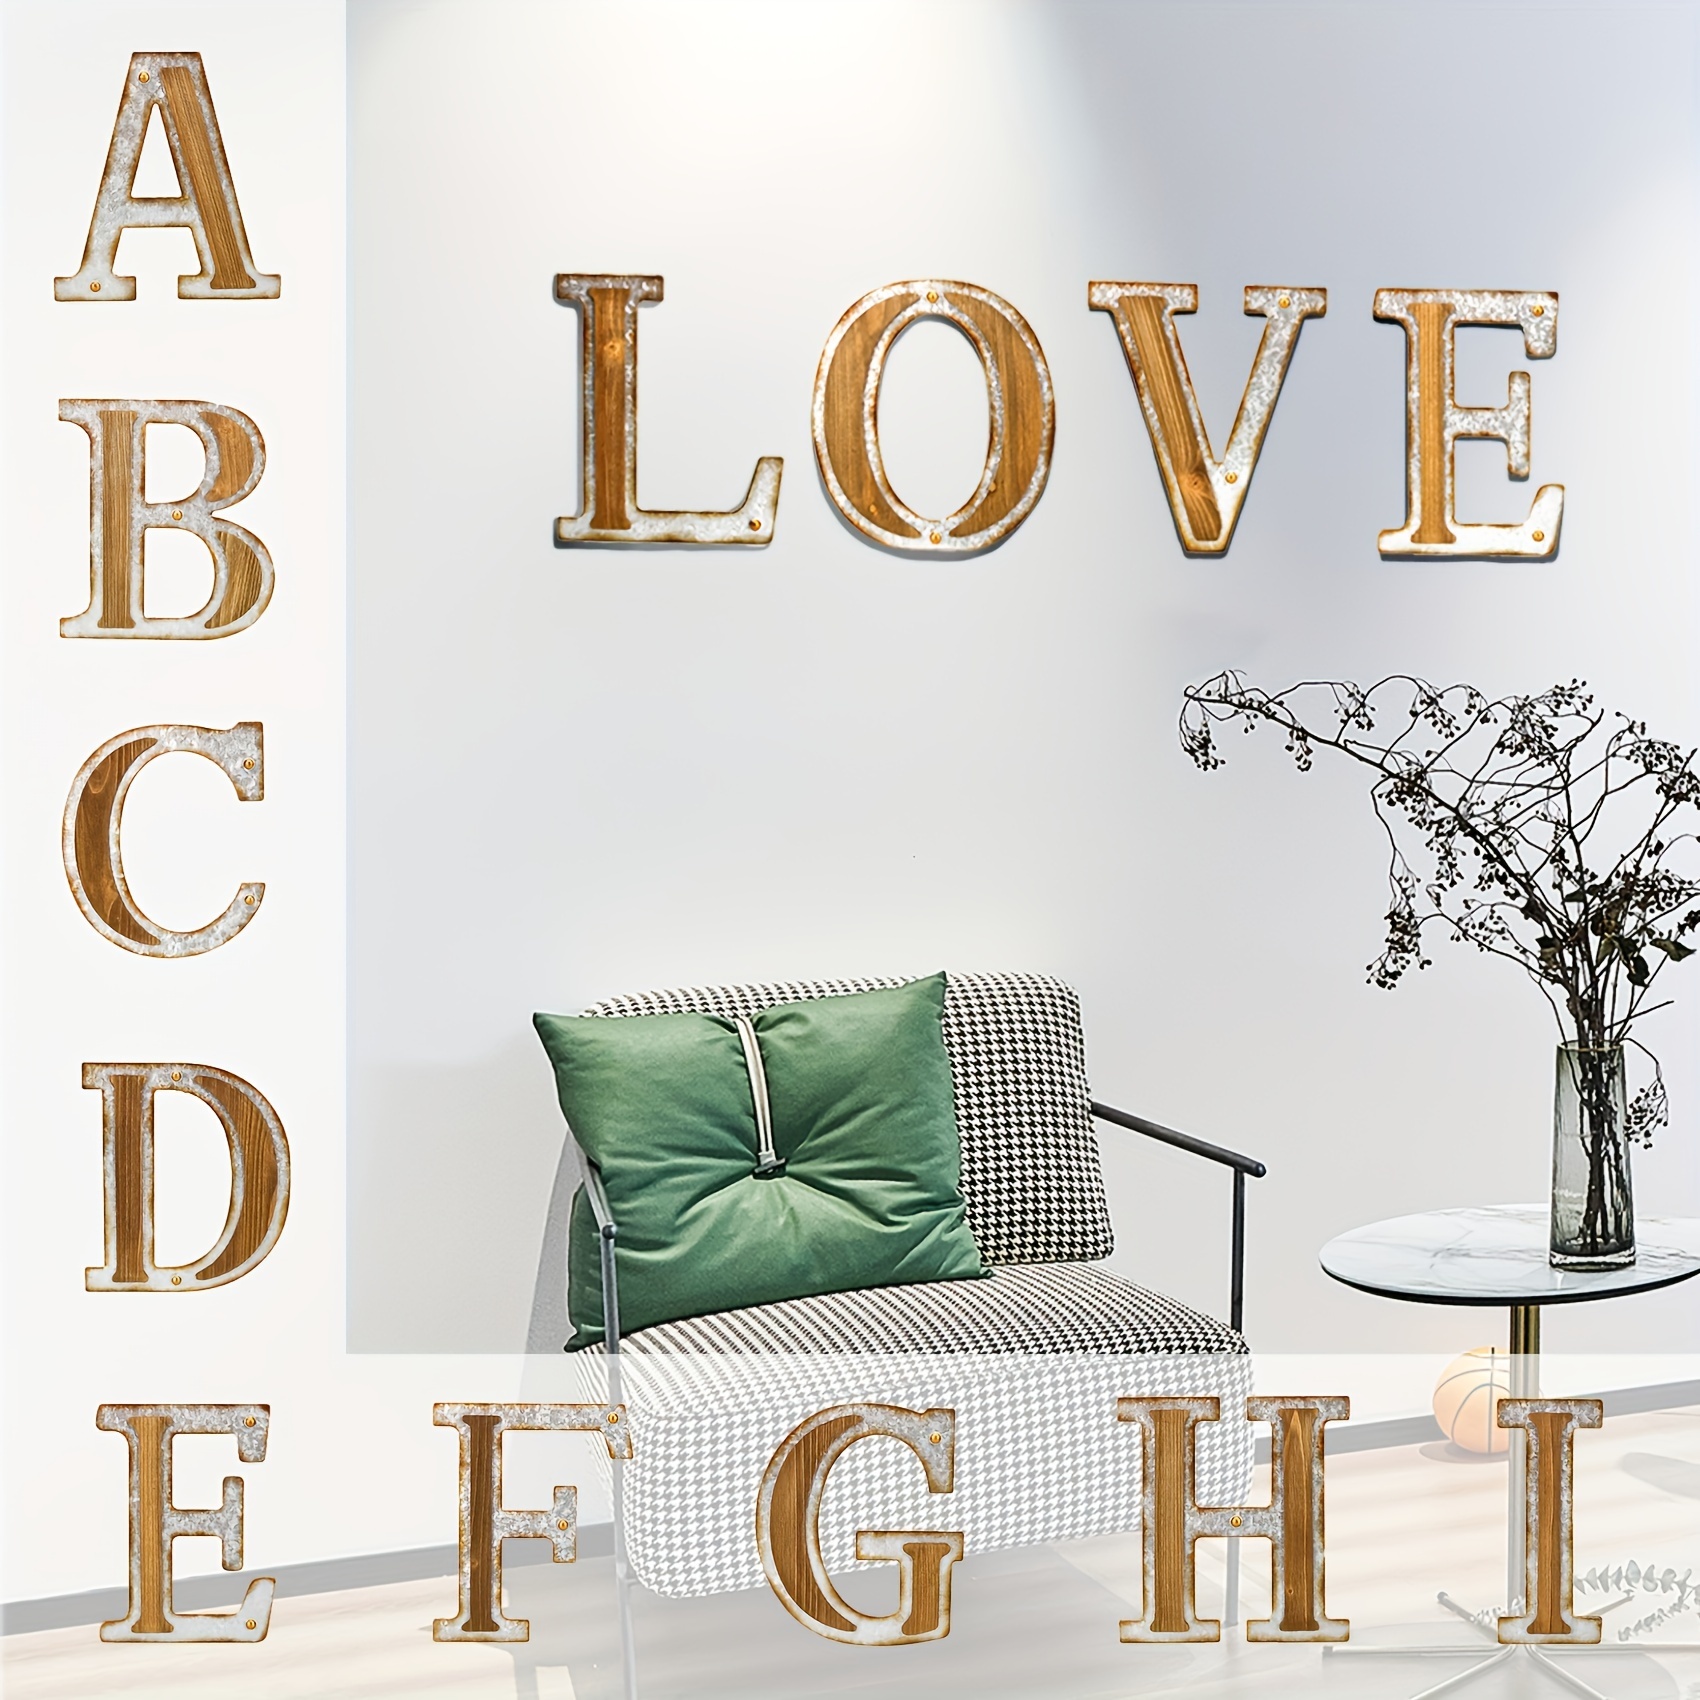 Small Black Walnut Wood Decorative Letters use for Wall Decor, Rustic 3D  Wooden Alphabets Block Word Sign, DIY Freestanding and Hanging Monogram